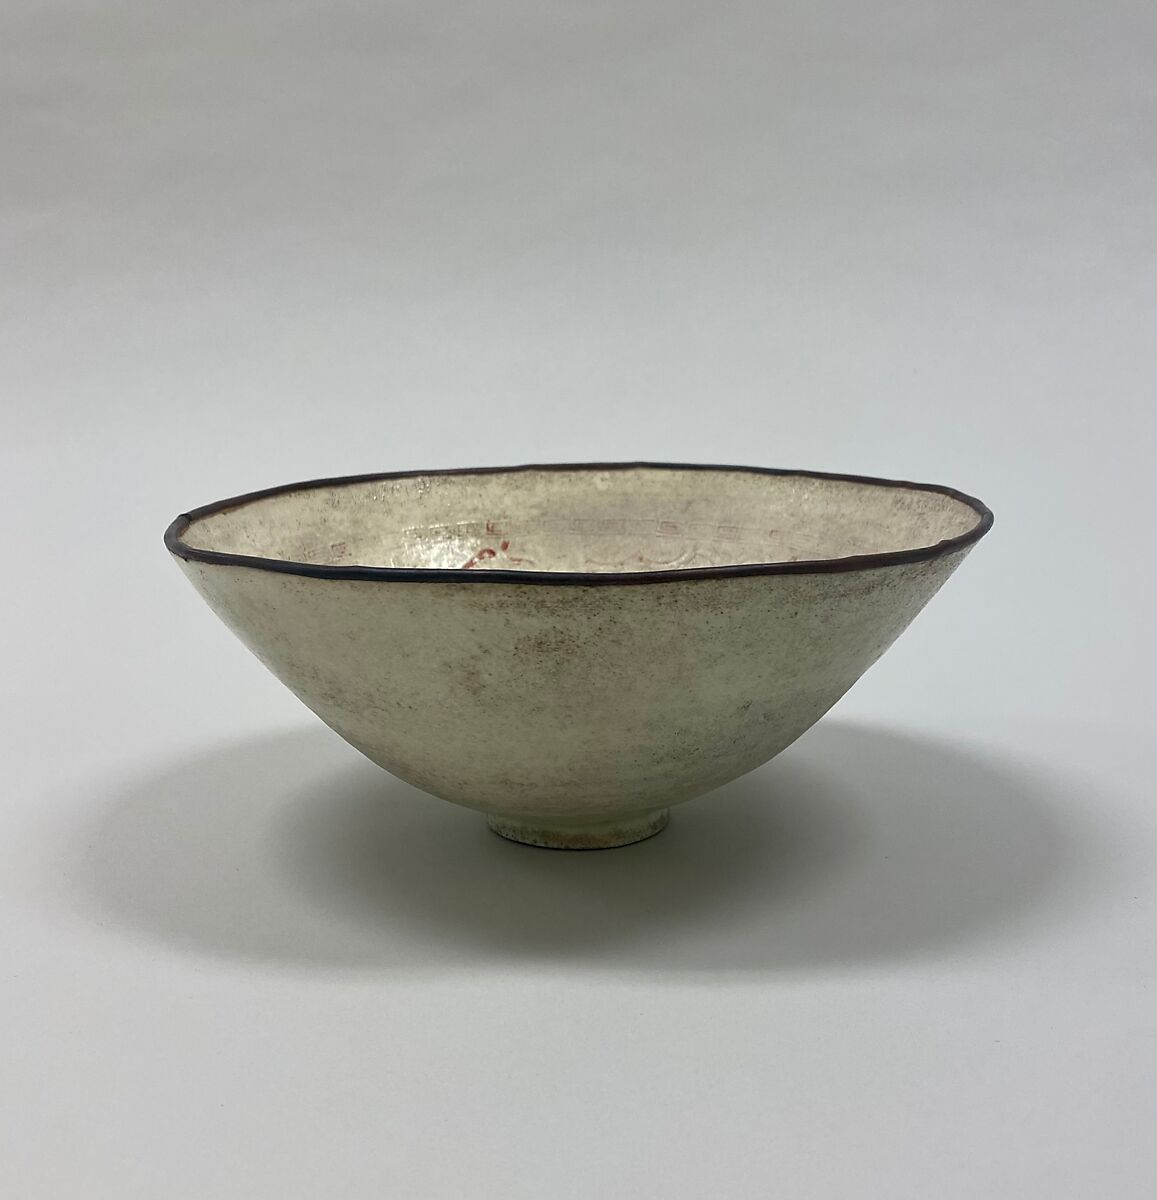 Bowl with birds and flowers, Porcelain with mold-impressed decoration (Ding-type ware), China 